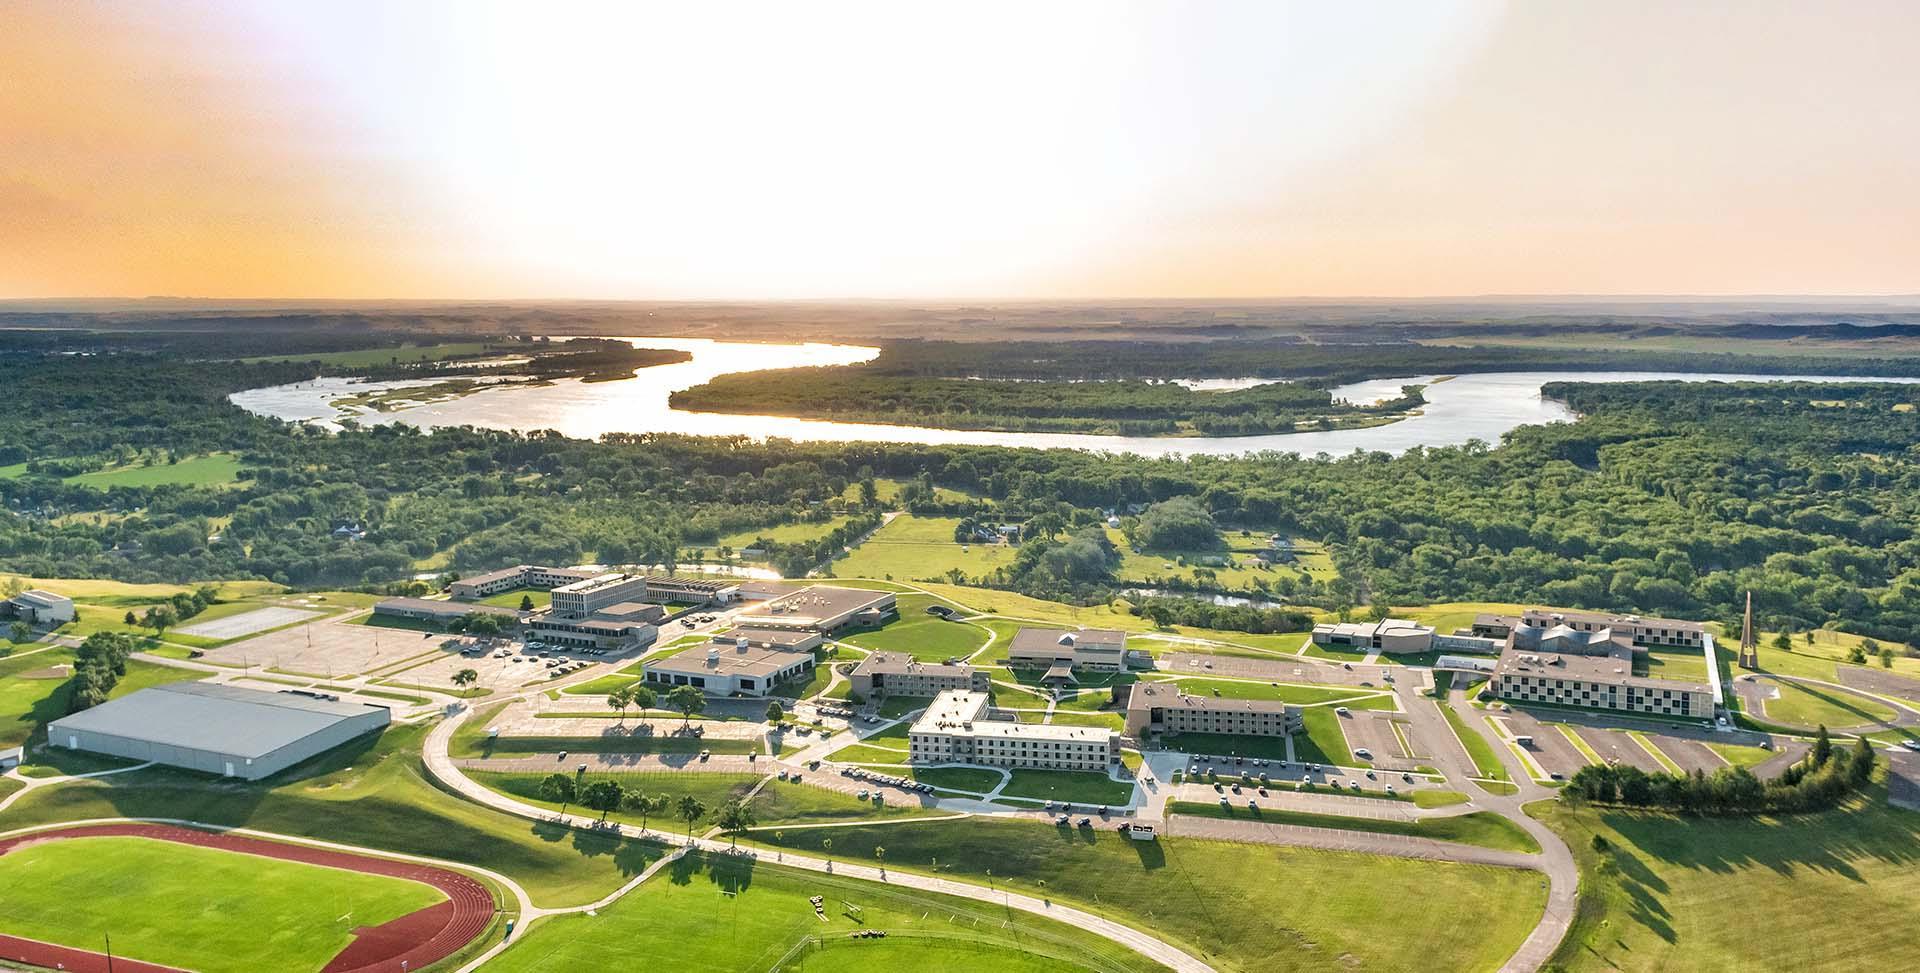 Aerial of the University of Mary campus at sunset with the Missouri River in the background